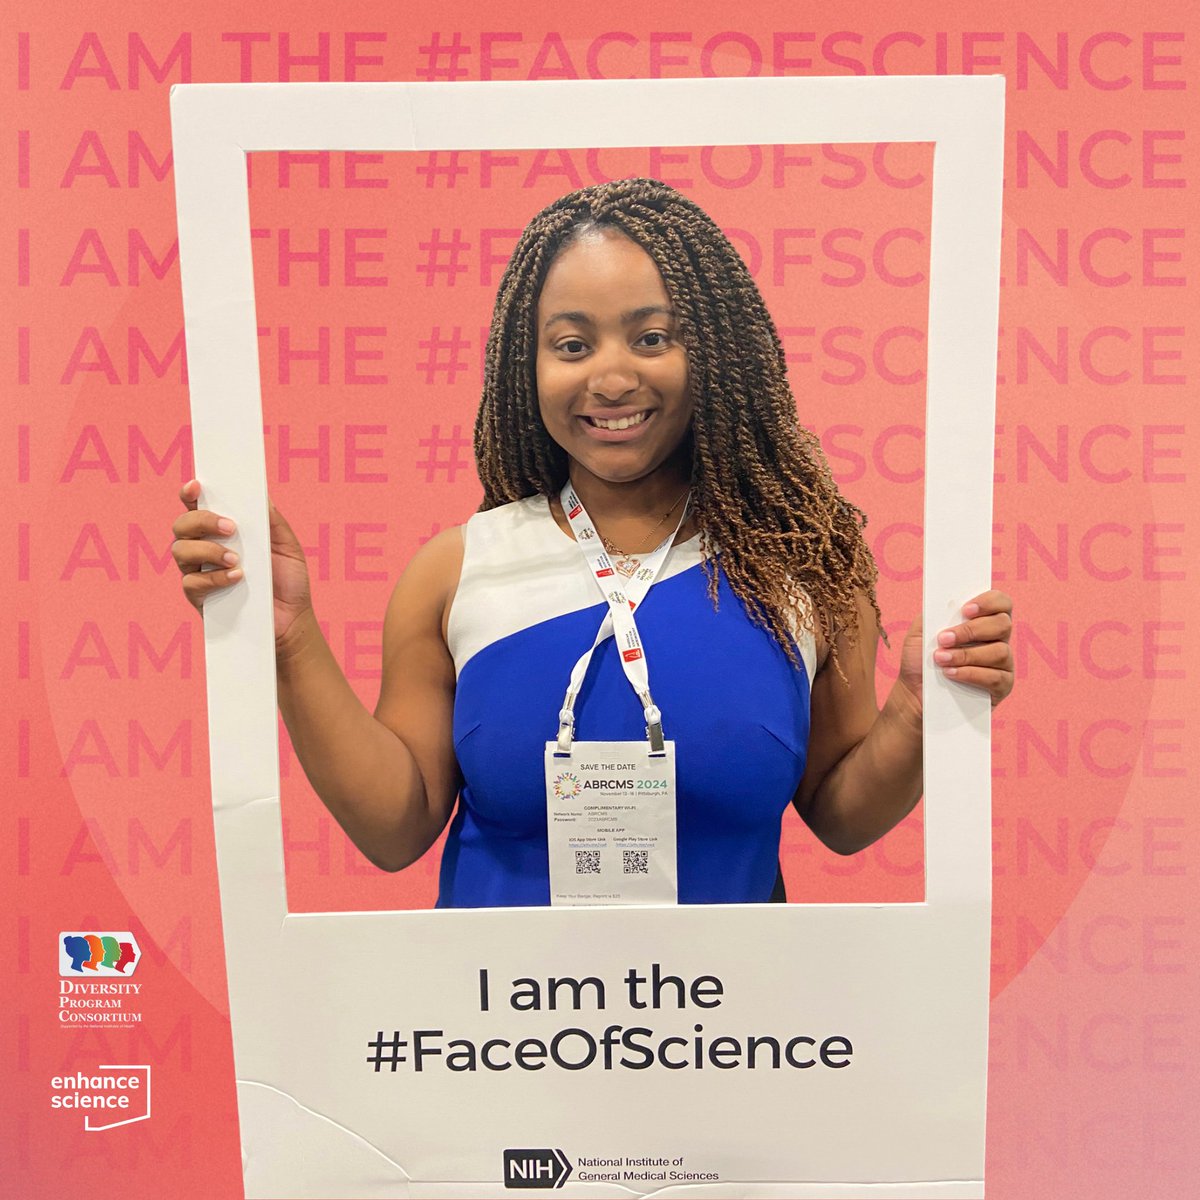 Layla, a student researcher in the @XULA_BUILD program, says, 'What I love most about being a scientist is discovering new things!' On April 24, share your own #FaceOfScience selfie and tell us what you love about research! Learn more: bit.ly/FOS424 @EnhanceScience